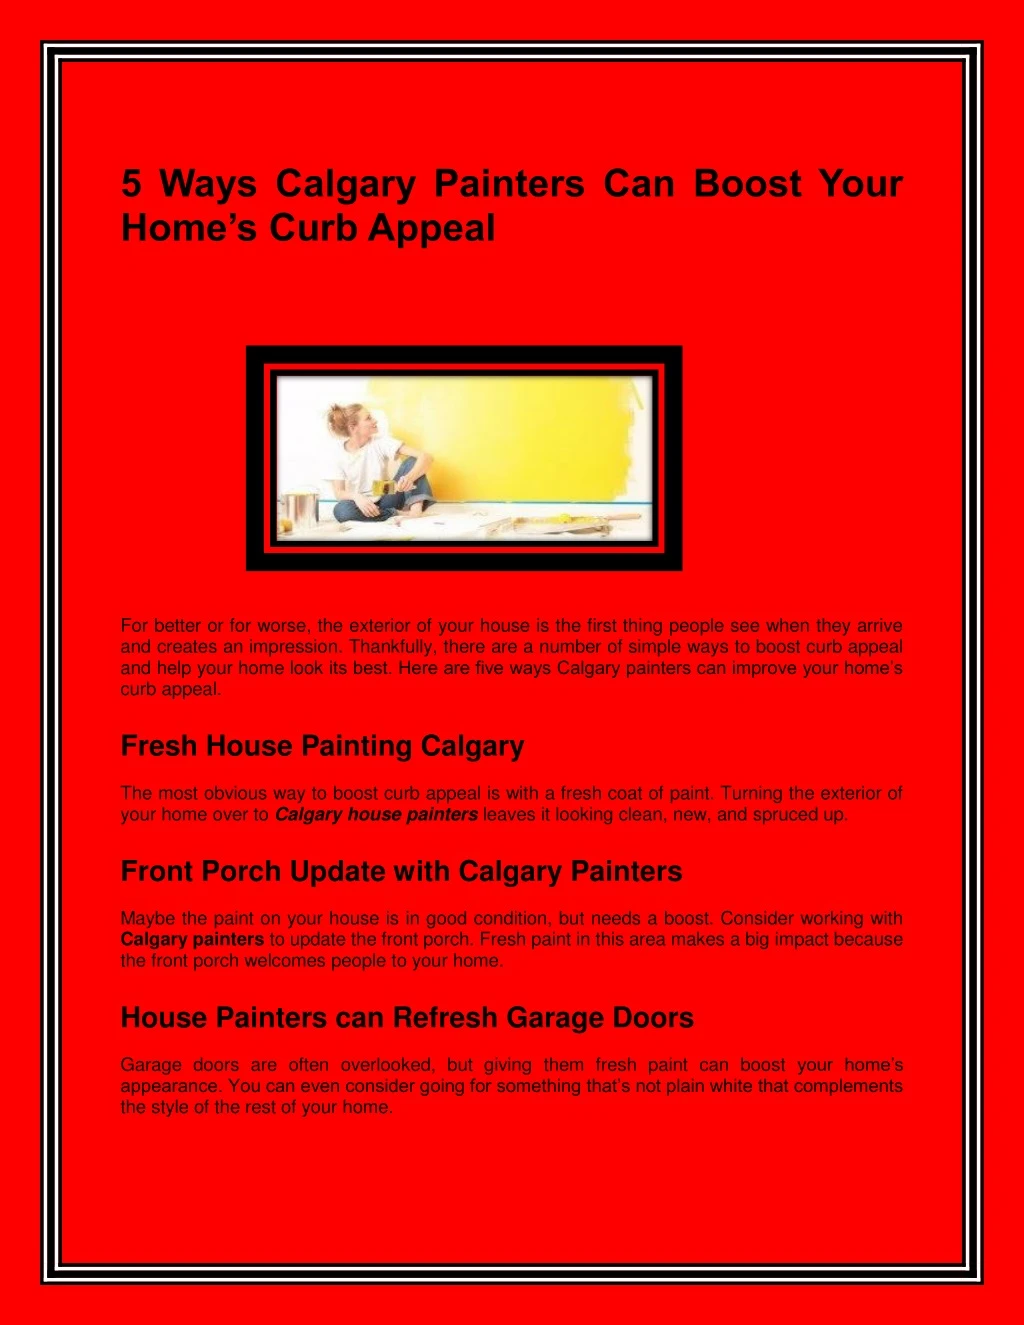 5 ways calgary painters can boost your home